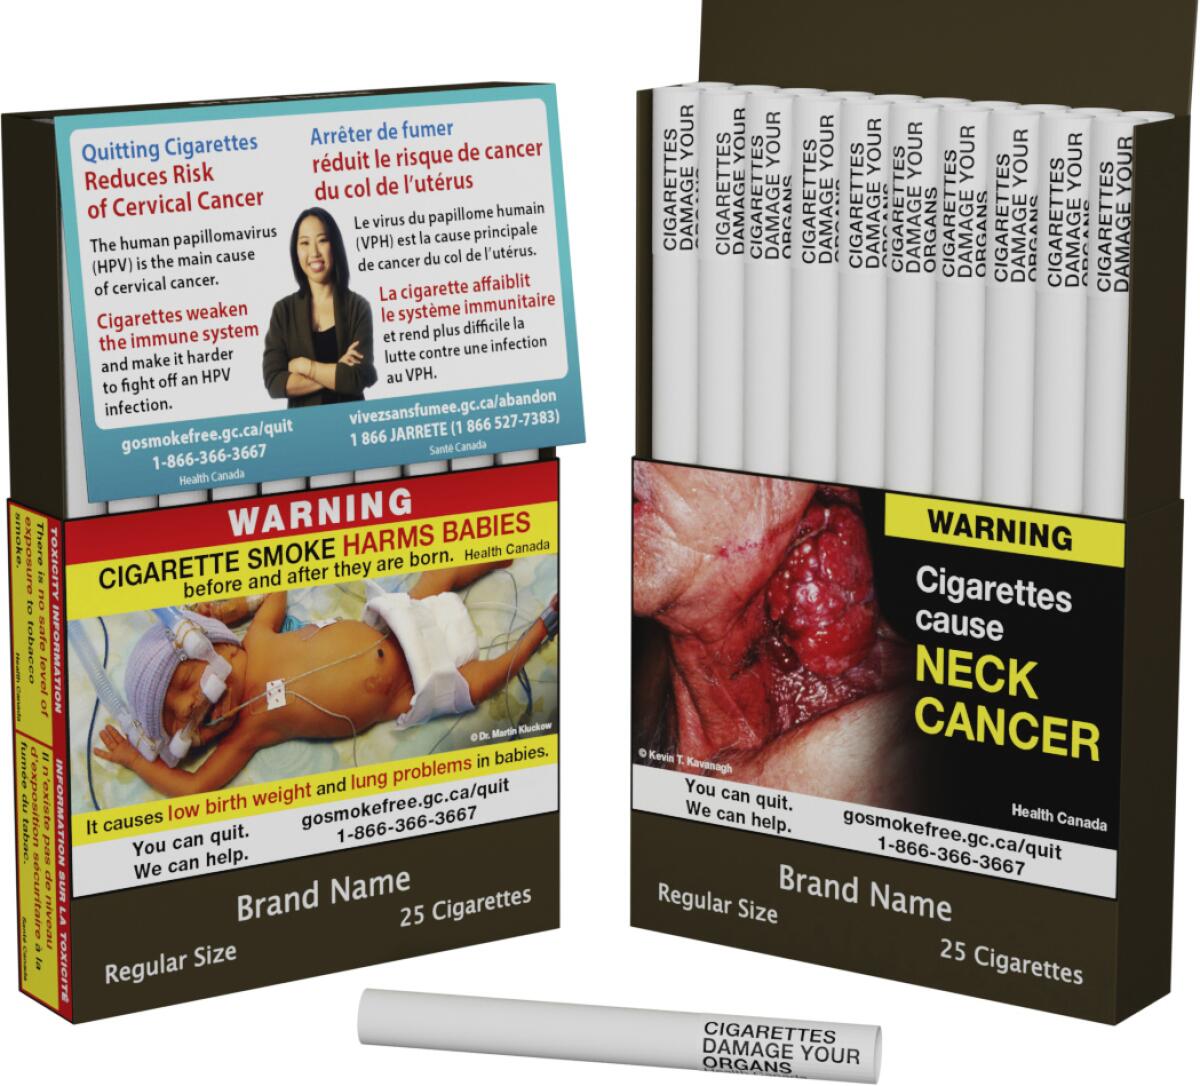 Two packs of cigarettes with graphic images and warnings on them, and a cigarette, foreground, bearing a health warning